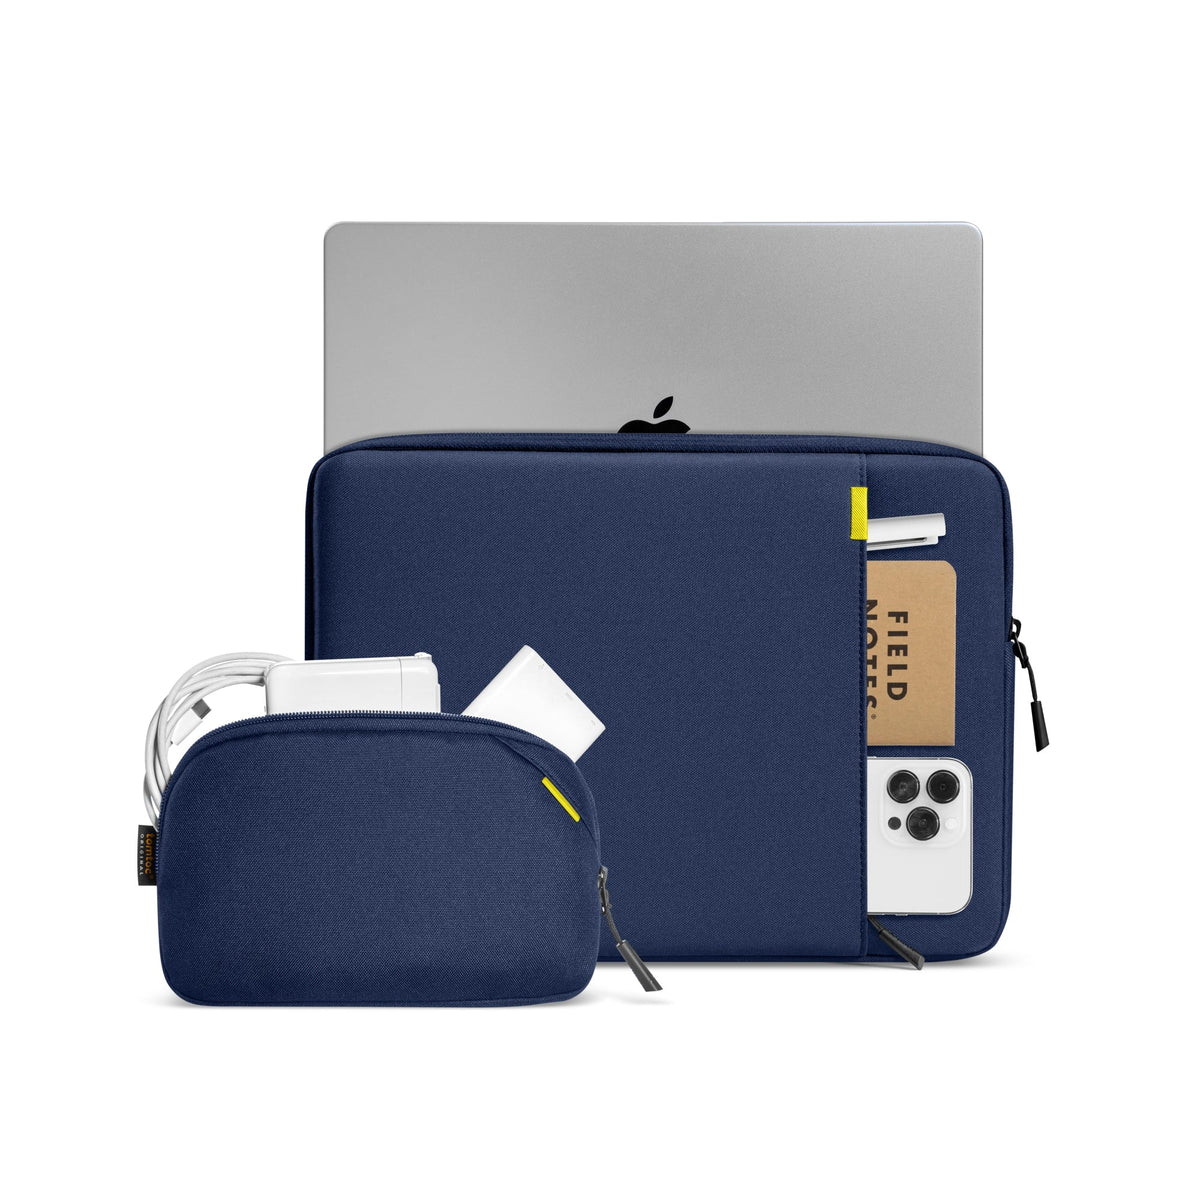 secondary_Defender-A13 Laptop Sleeve Kit For 14-inch New MacBook Pro | Navy Blue